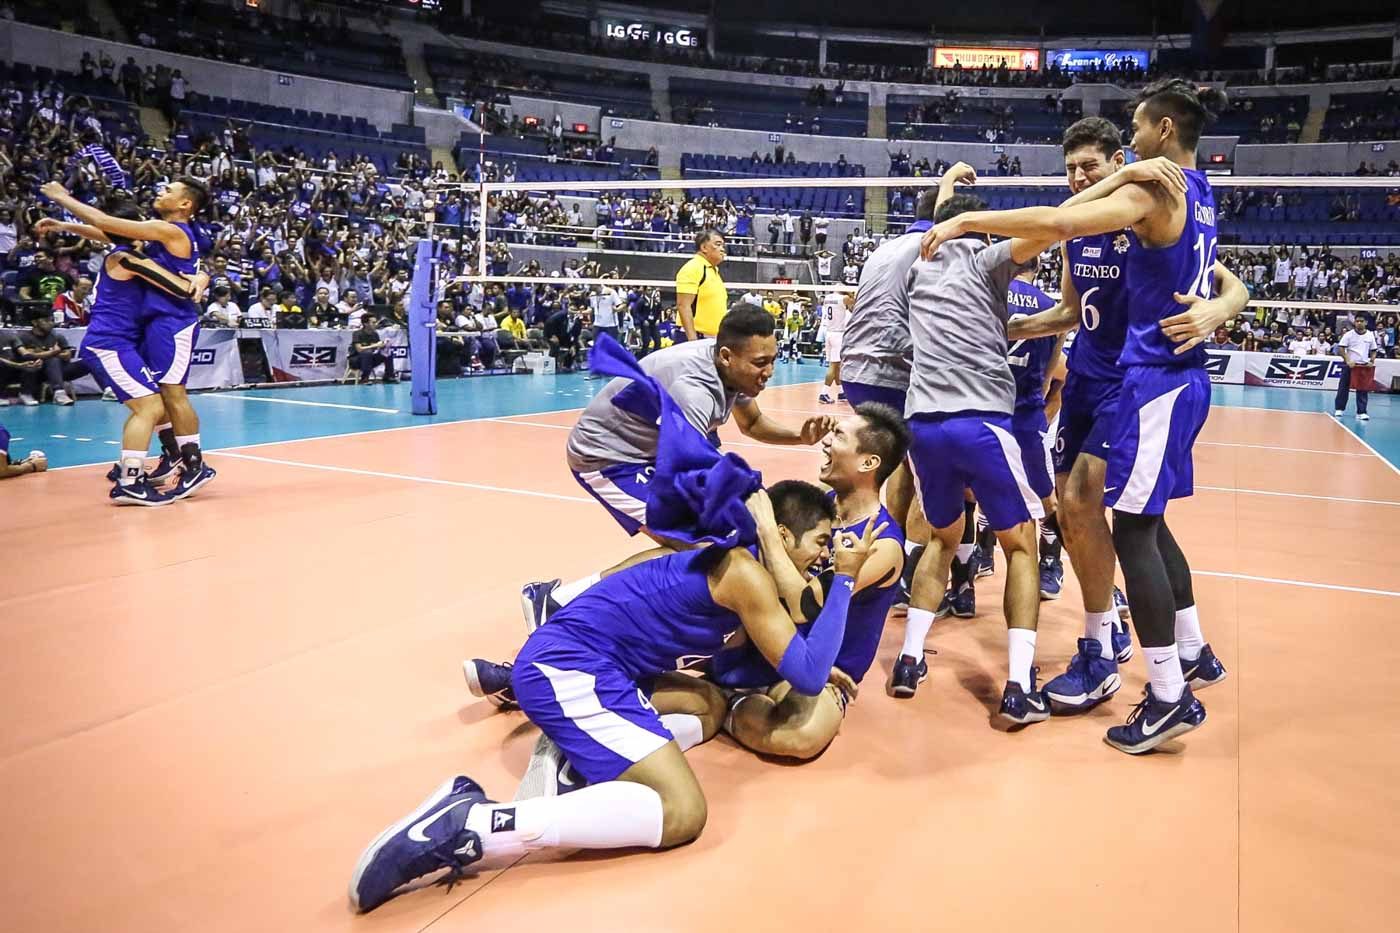 Ateneo Blue Eagles complete 3-peat of men’s volleyball title